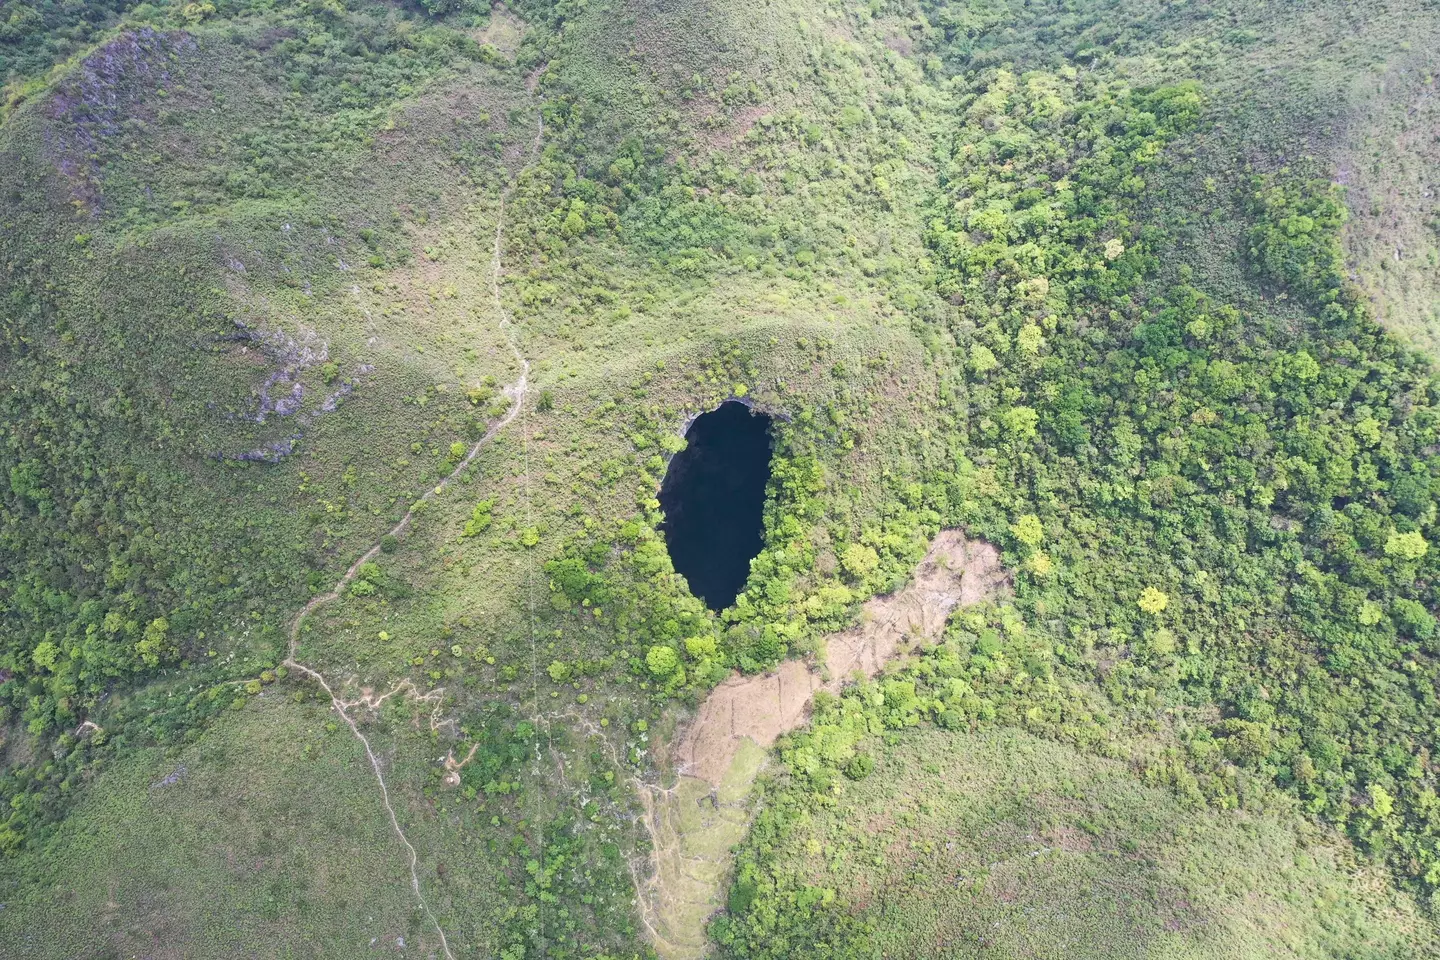 Guangxi is well-known for sinkholes.